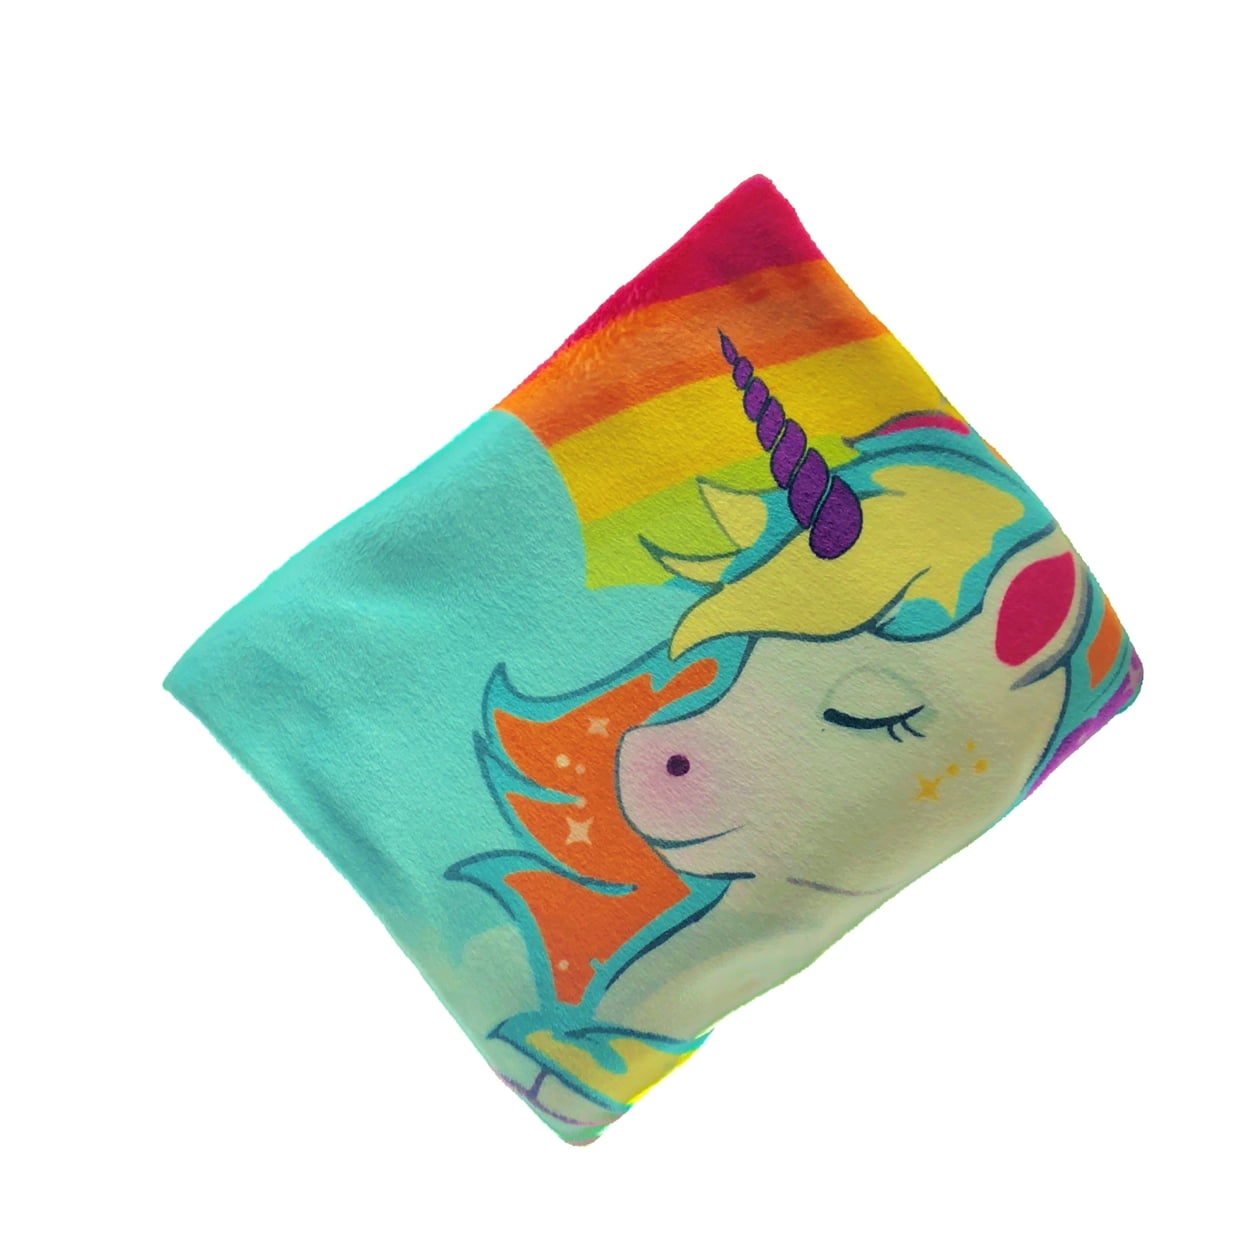 Picture of 3P Experts Ruby Unicorn Fleece Blanket  Multi Color            